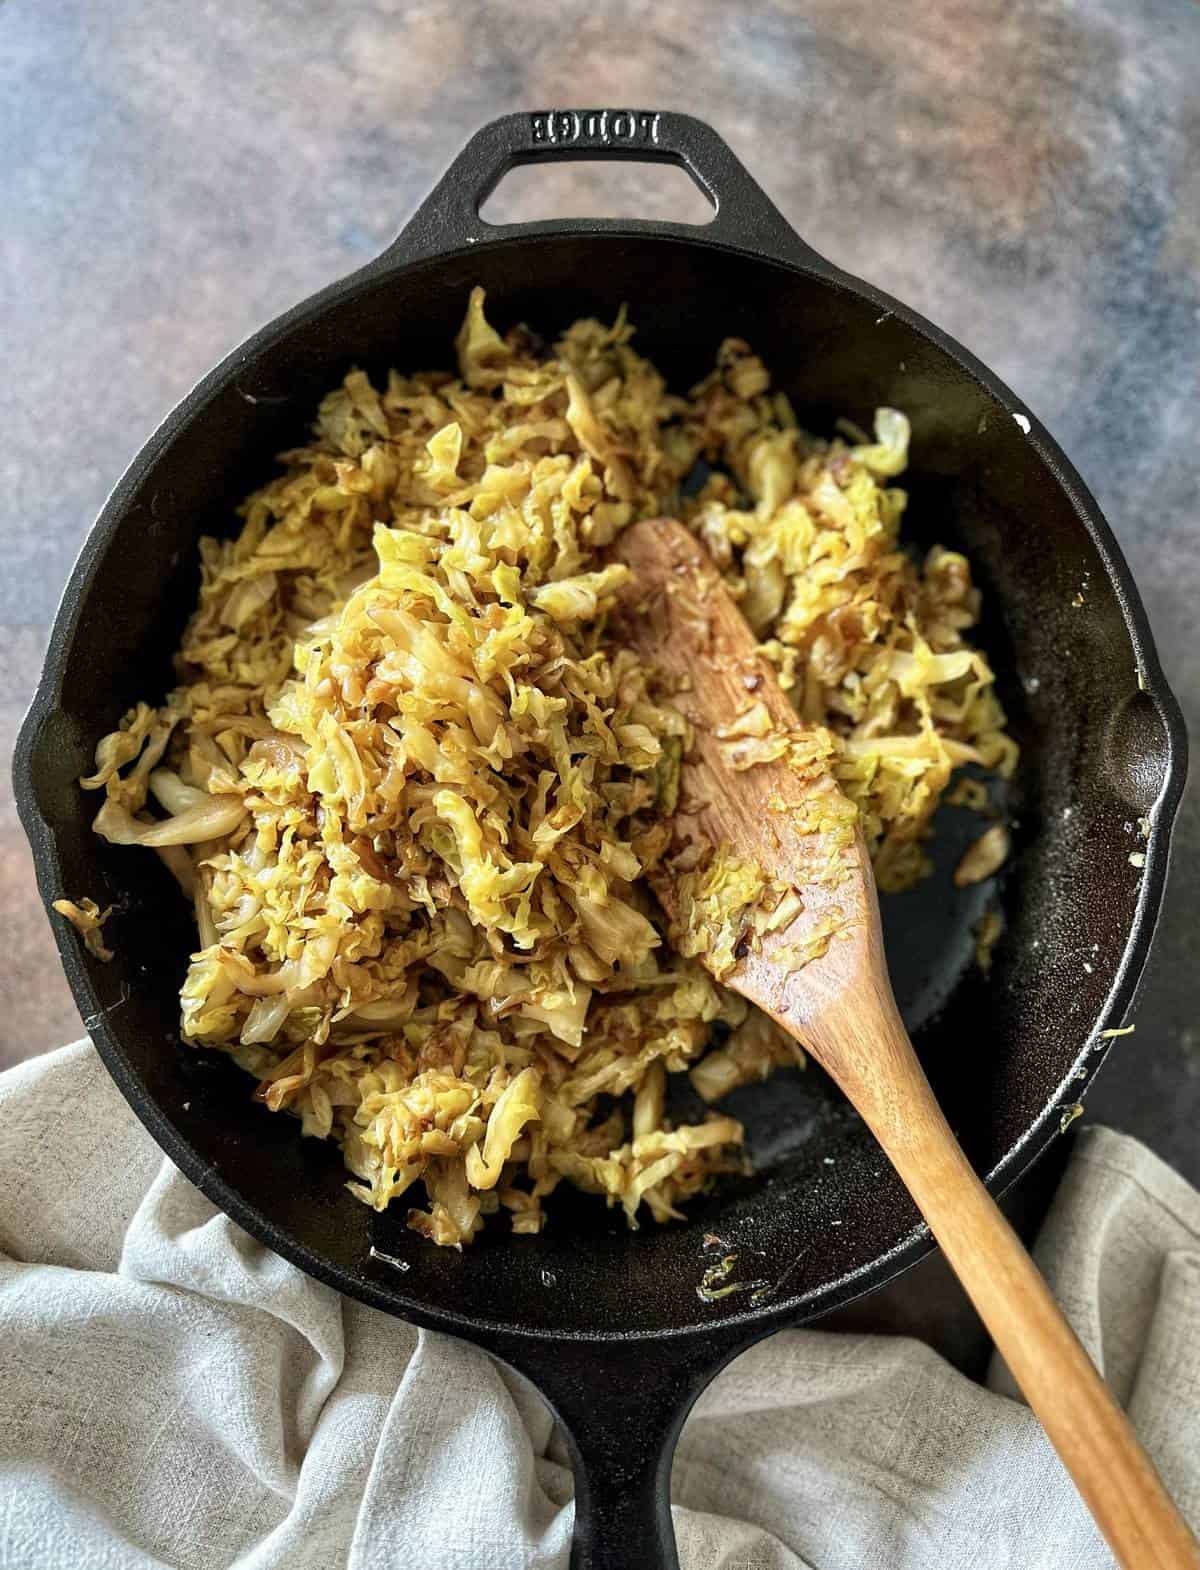 Fried cabbage in a cast iron pan.